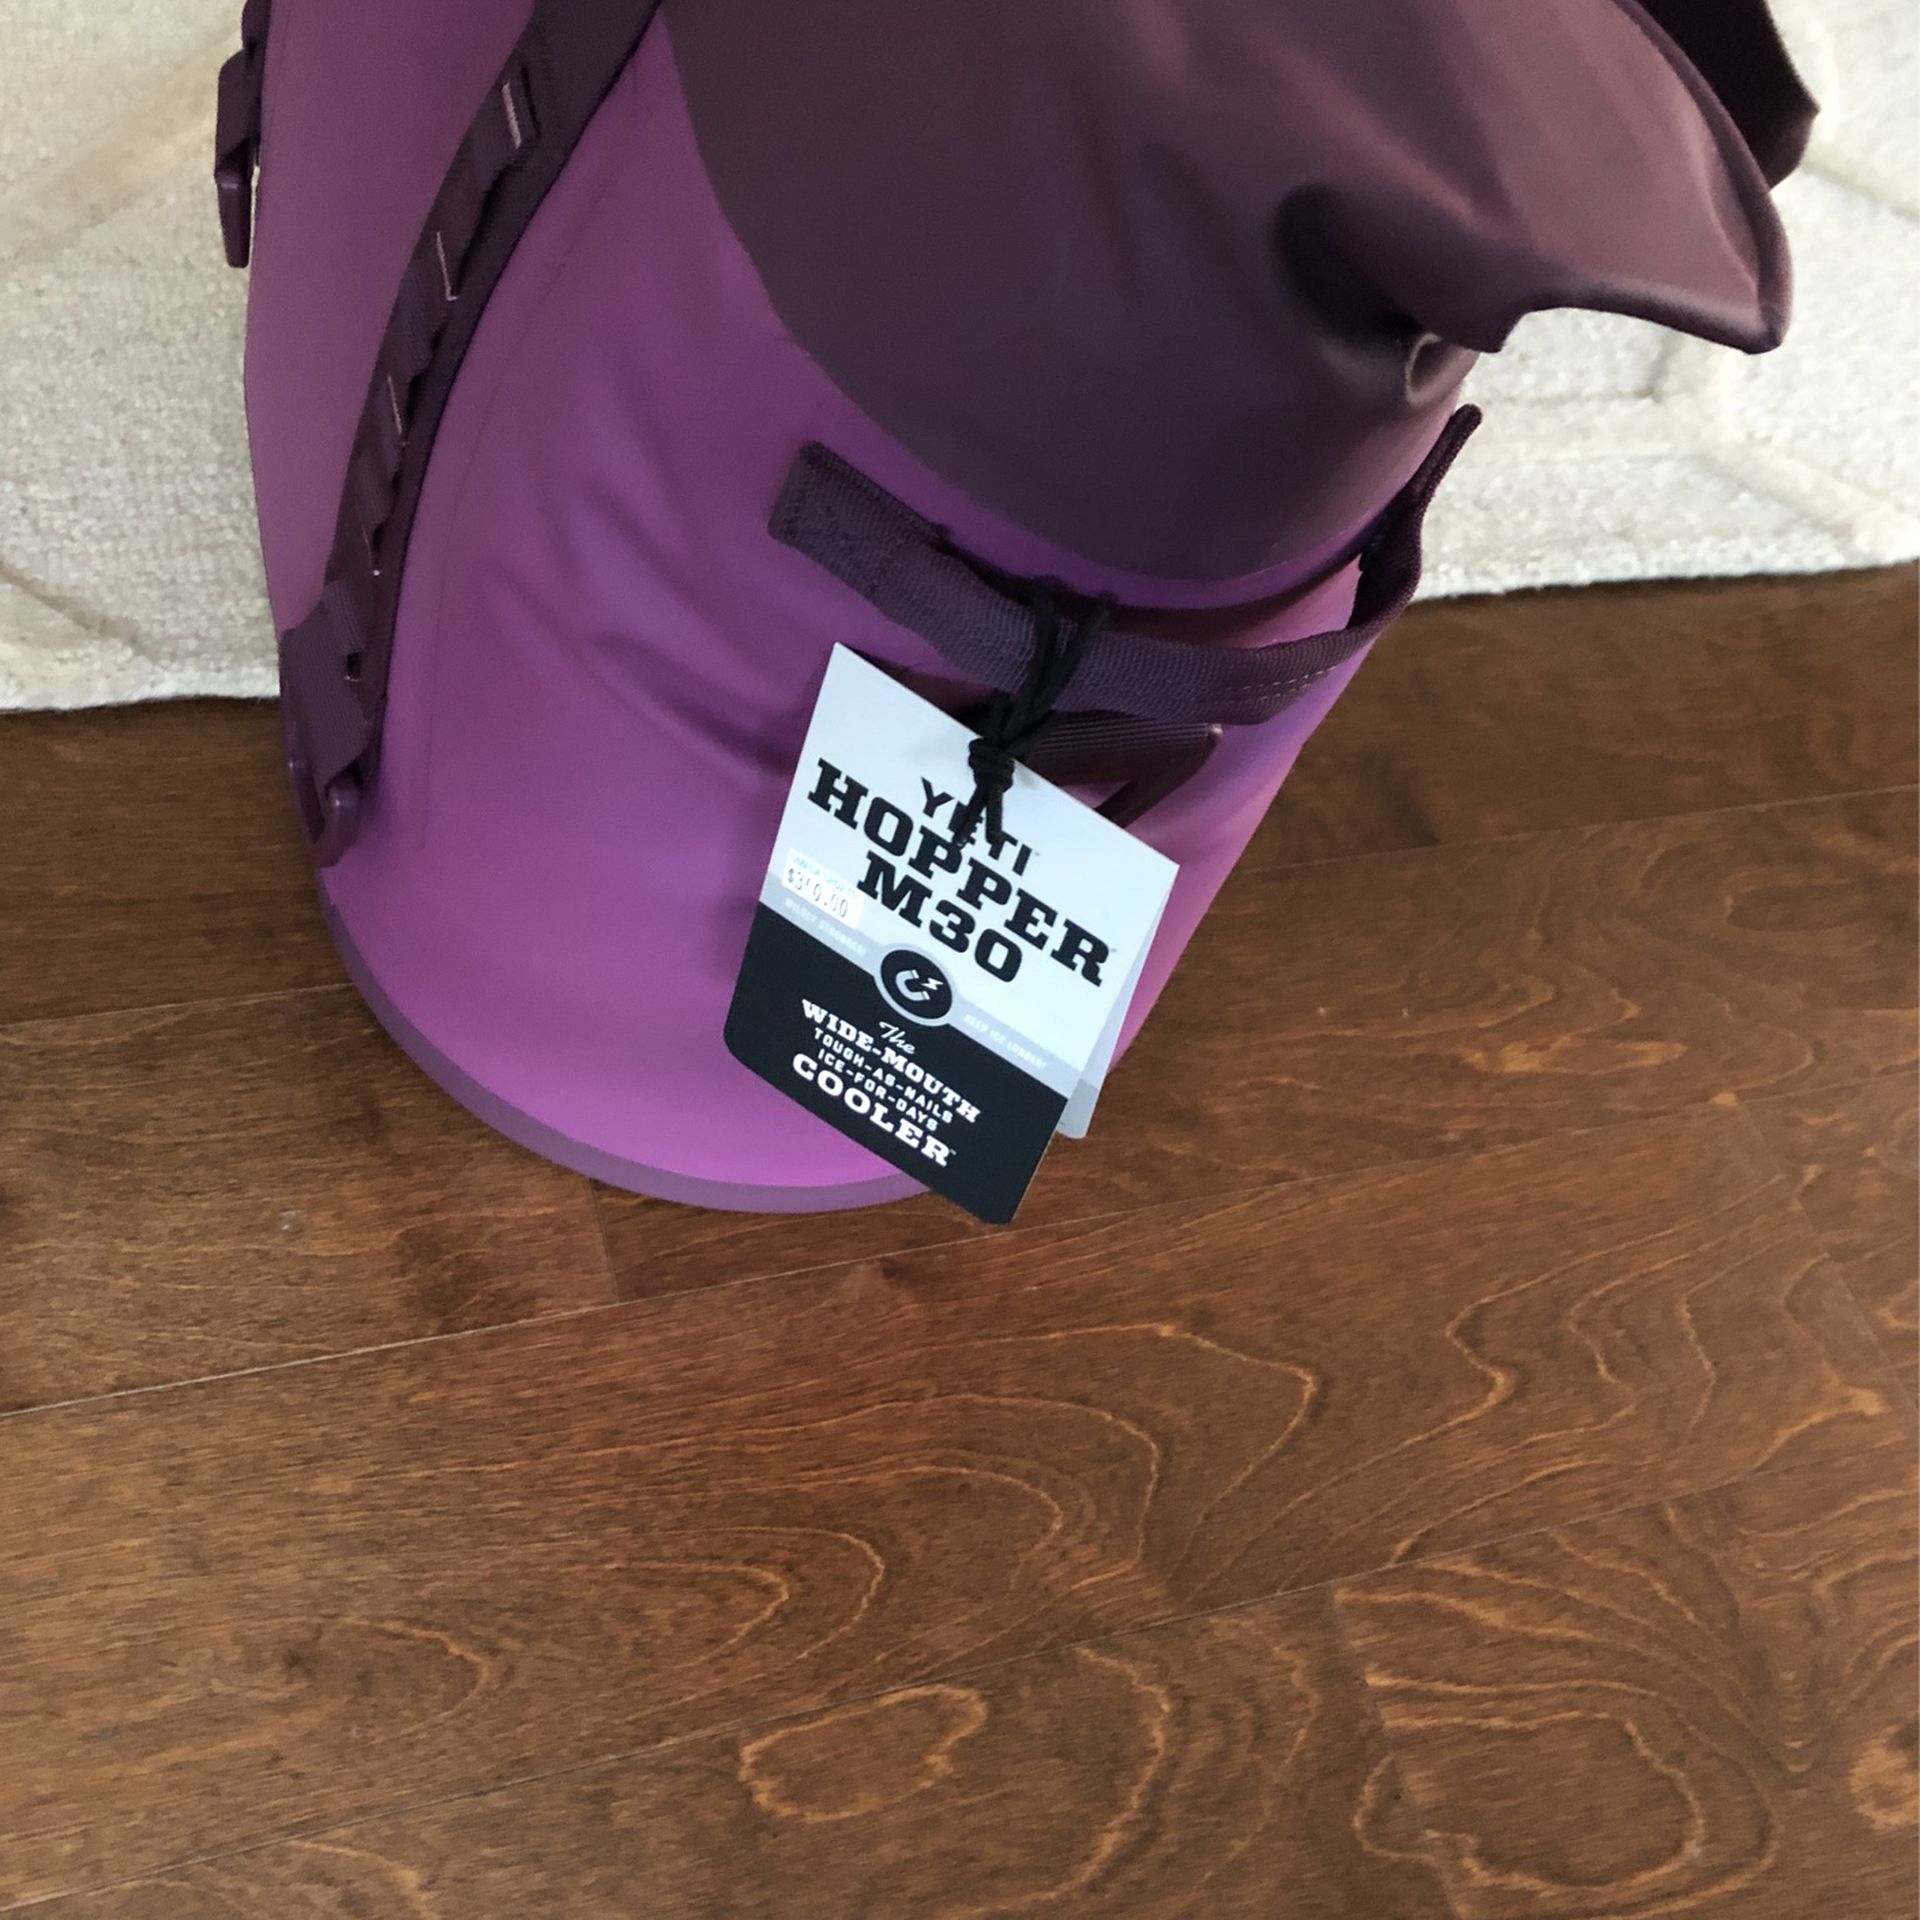 YETI Flip Hopper 8 Portable Soft Cooler for Sale in Charlotte, NC - OfferUp